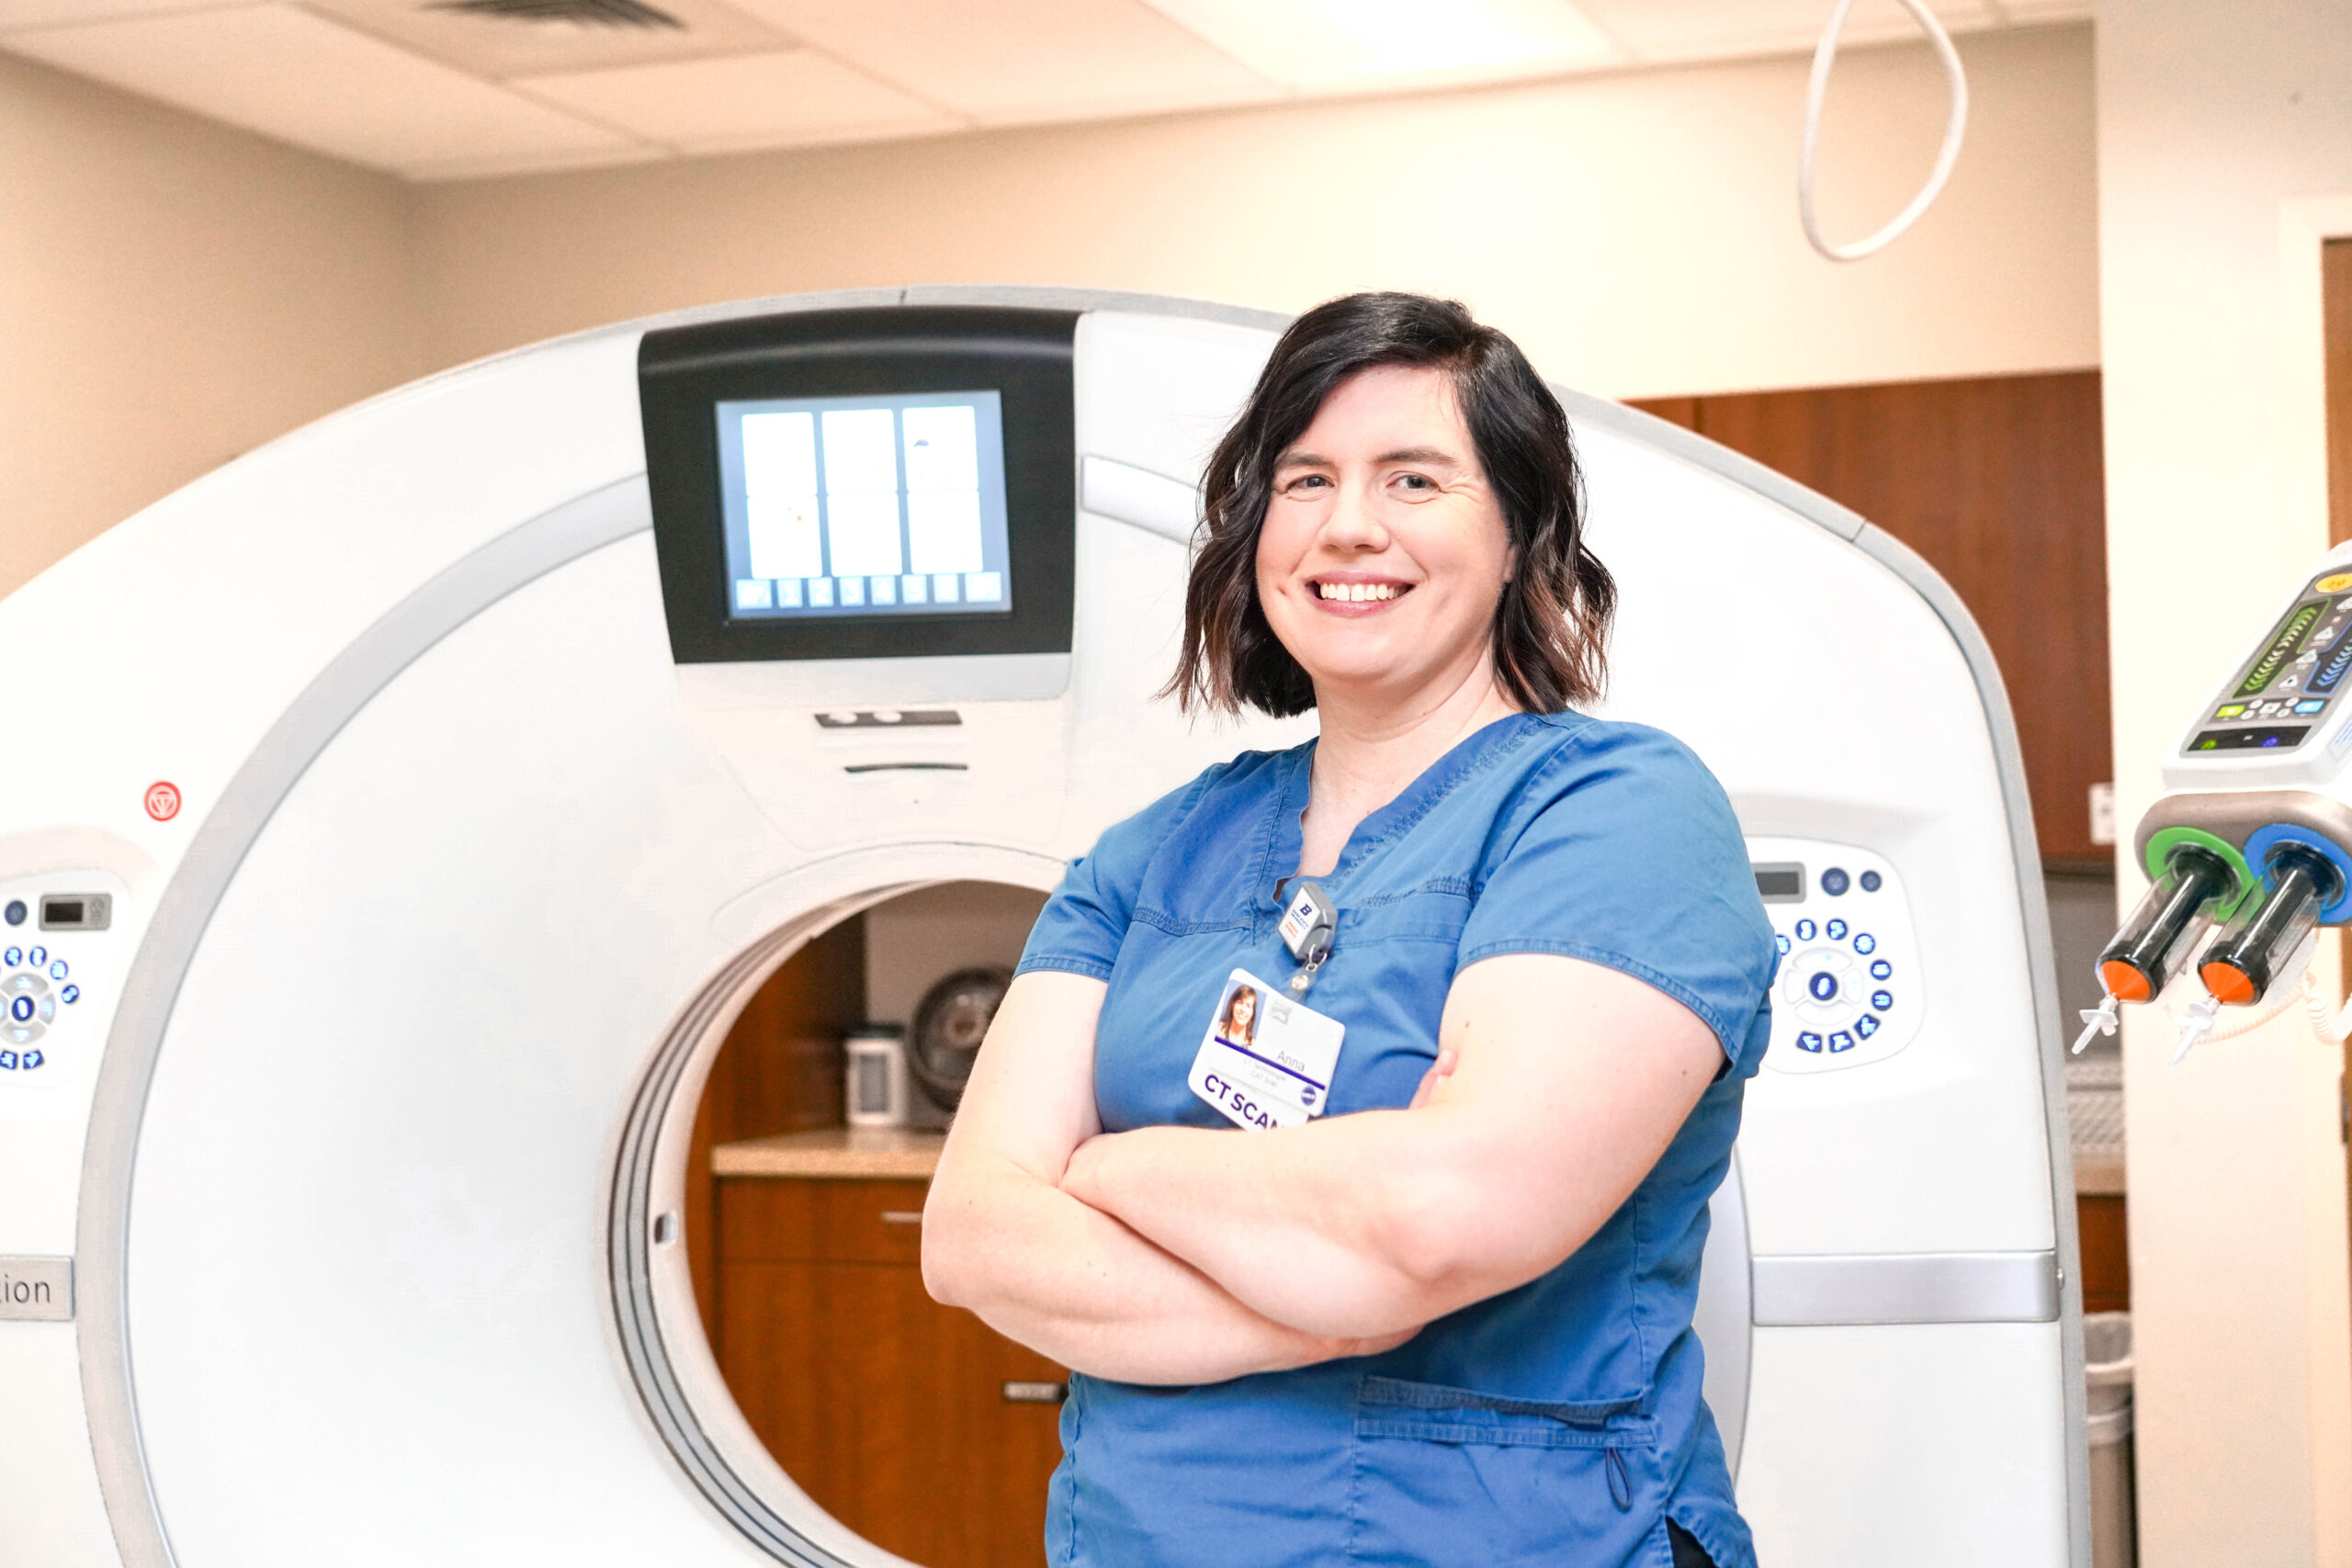 Anna Schreiber wears blue scrubs and stands in front of imaging machine.